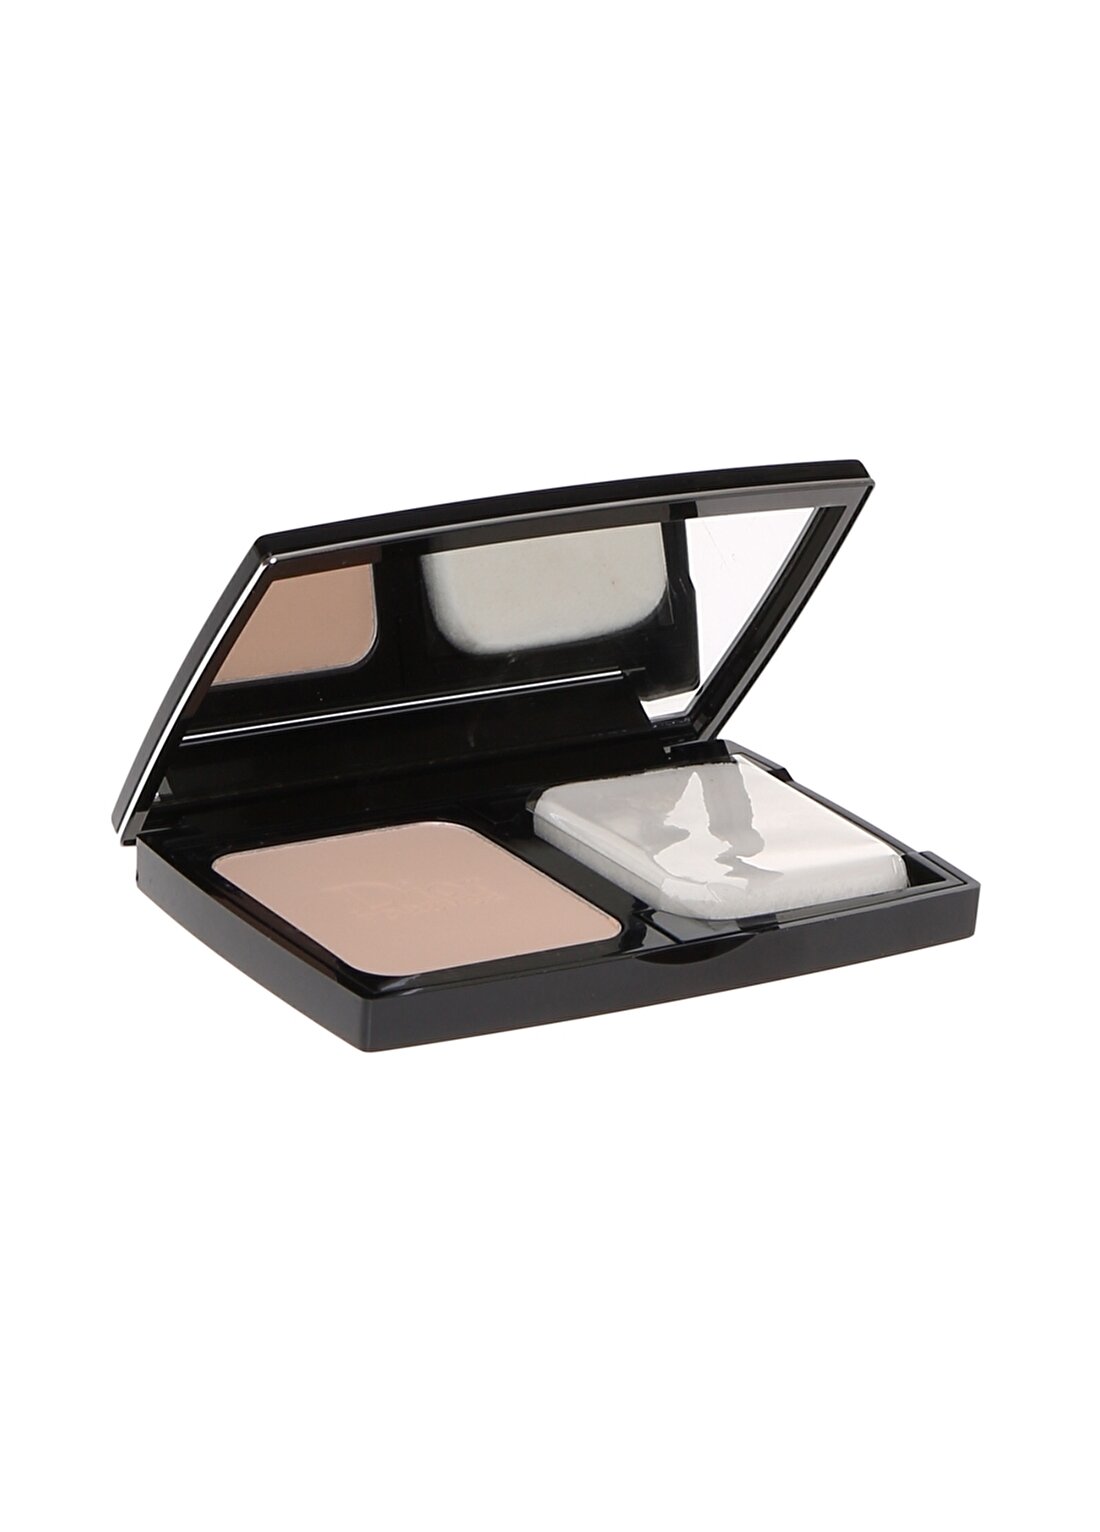 Dior Diorskin Forever Extreme Control 20 Light Beige Pudra